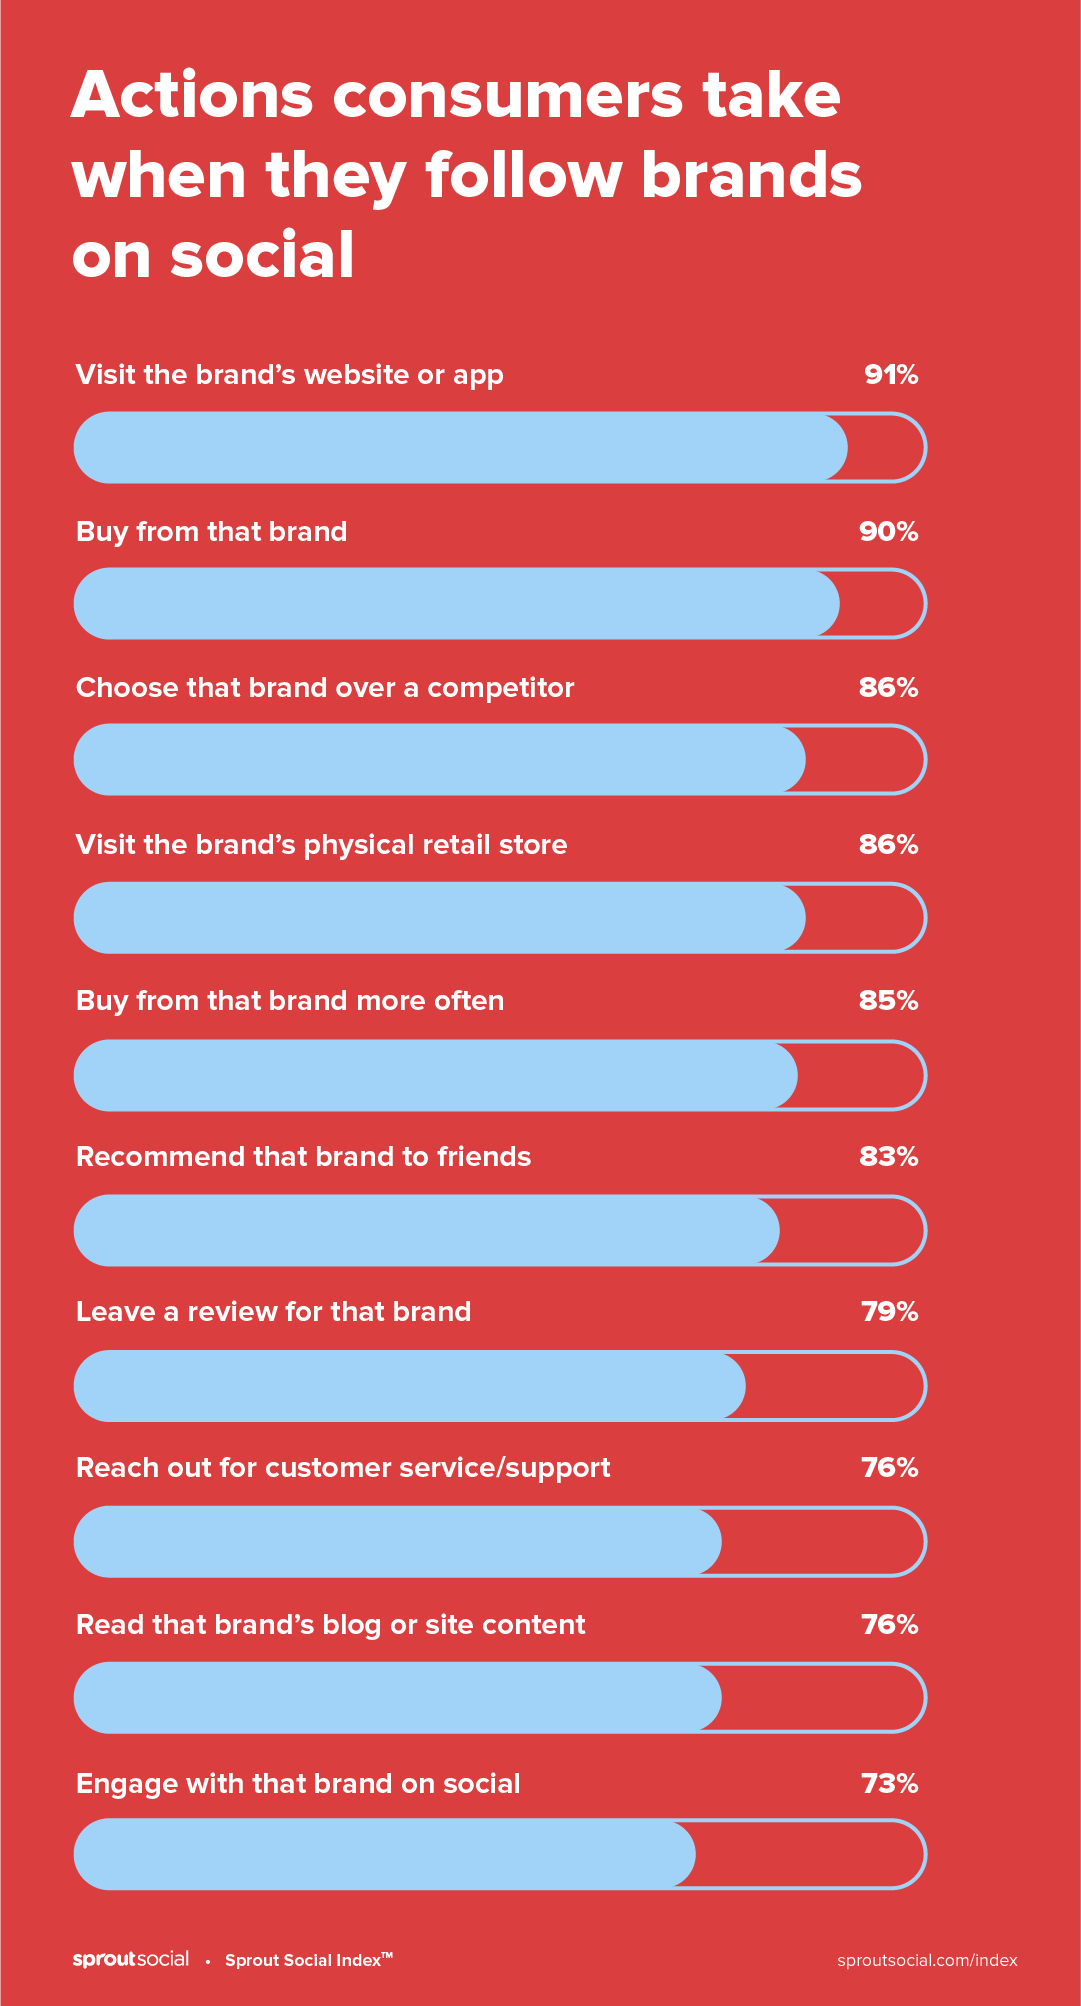 Actions consumers take when they follow brands on social